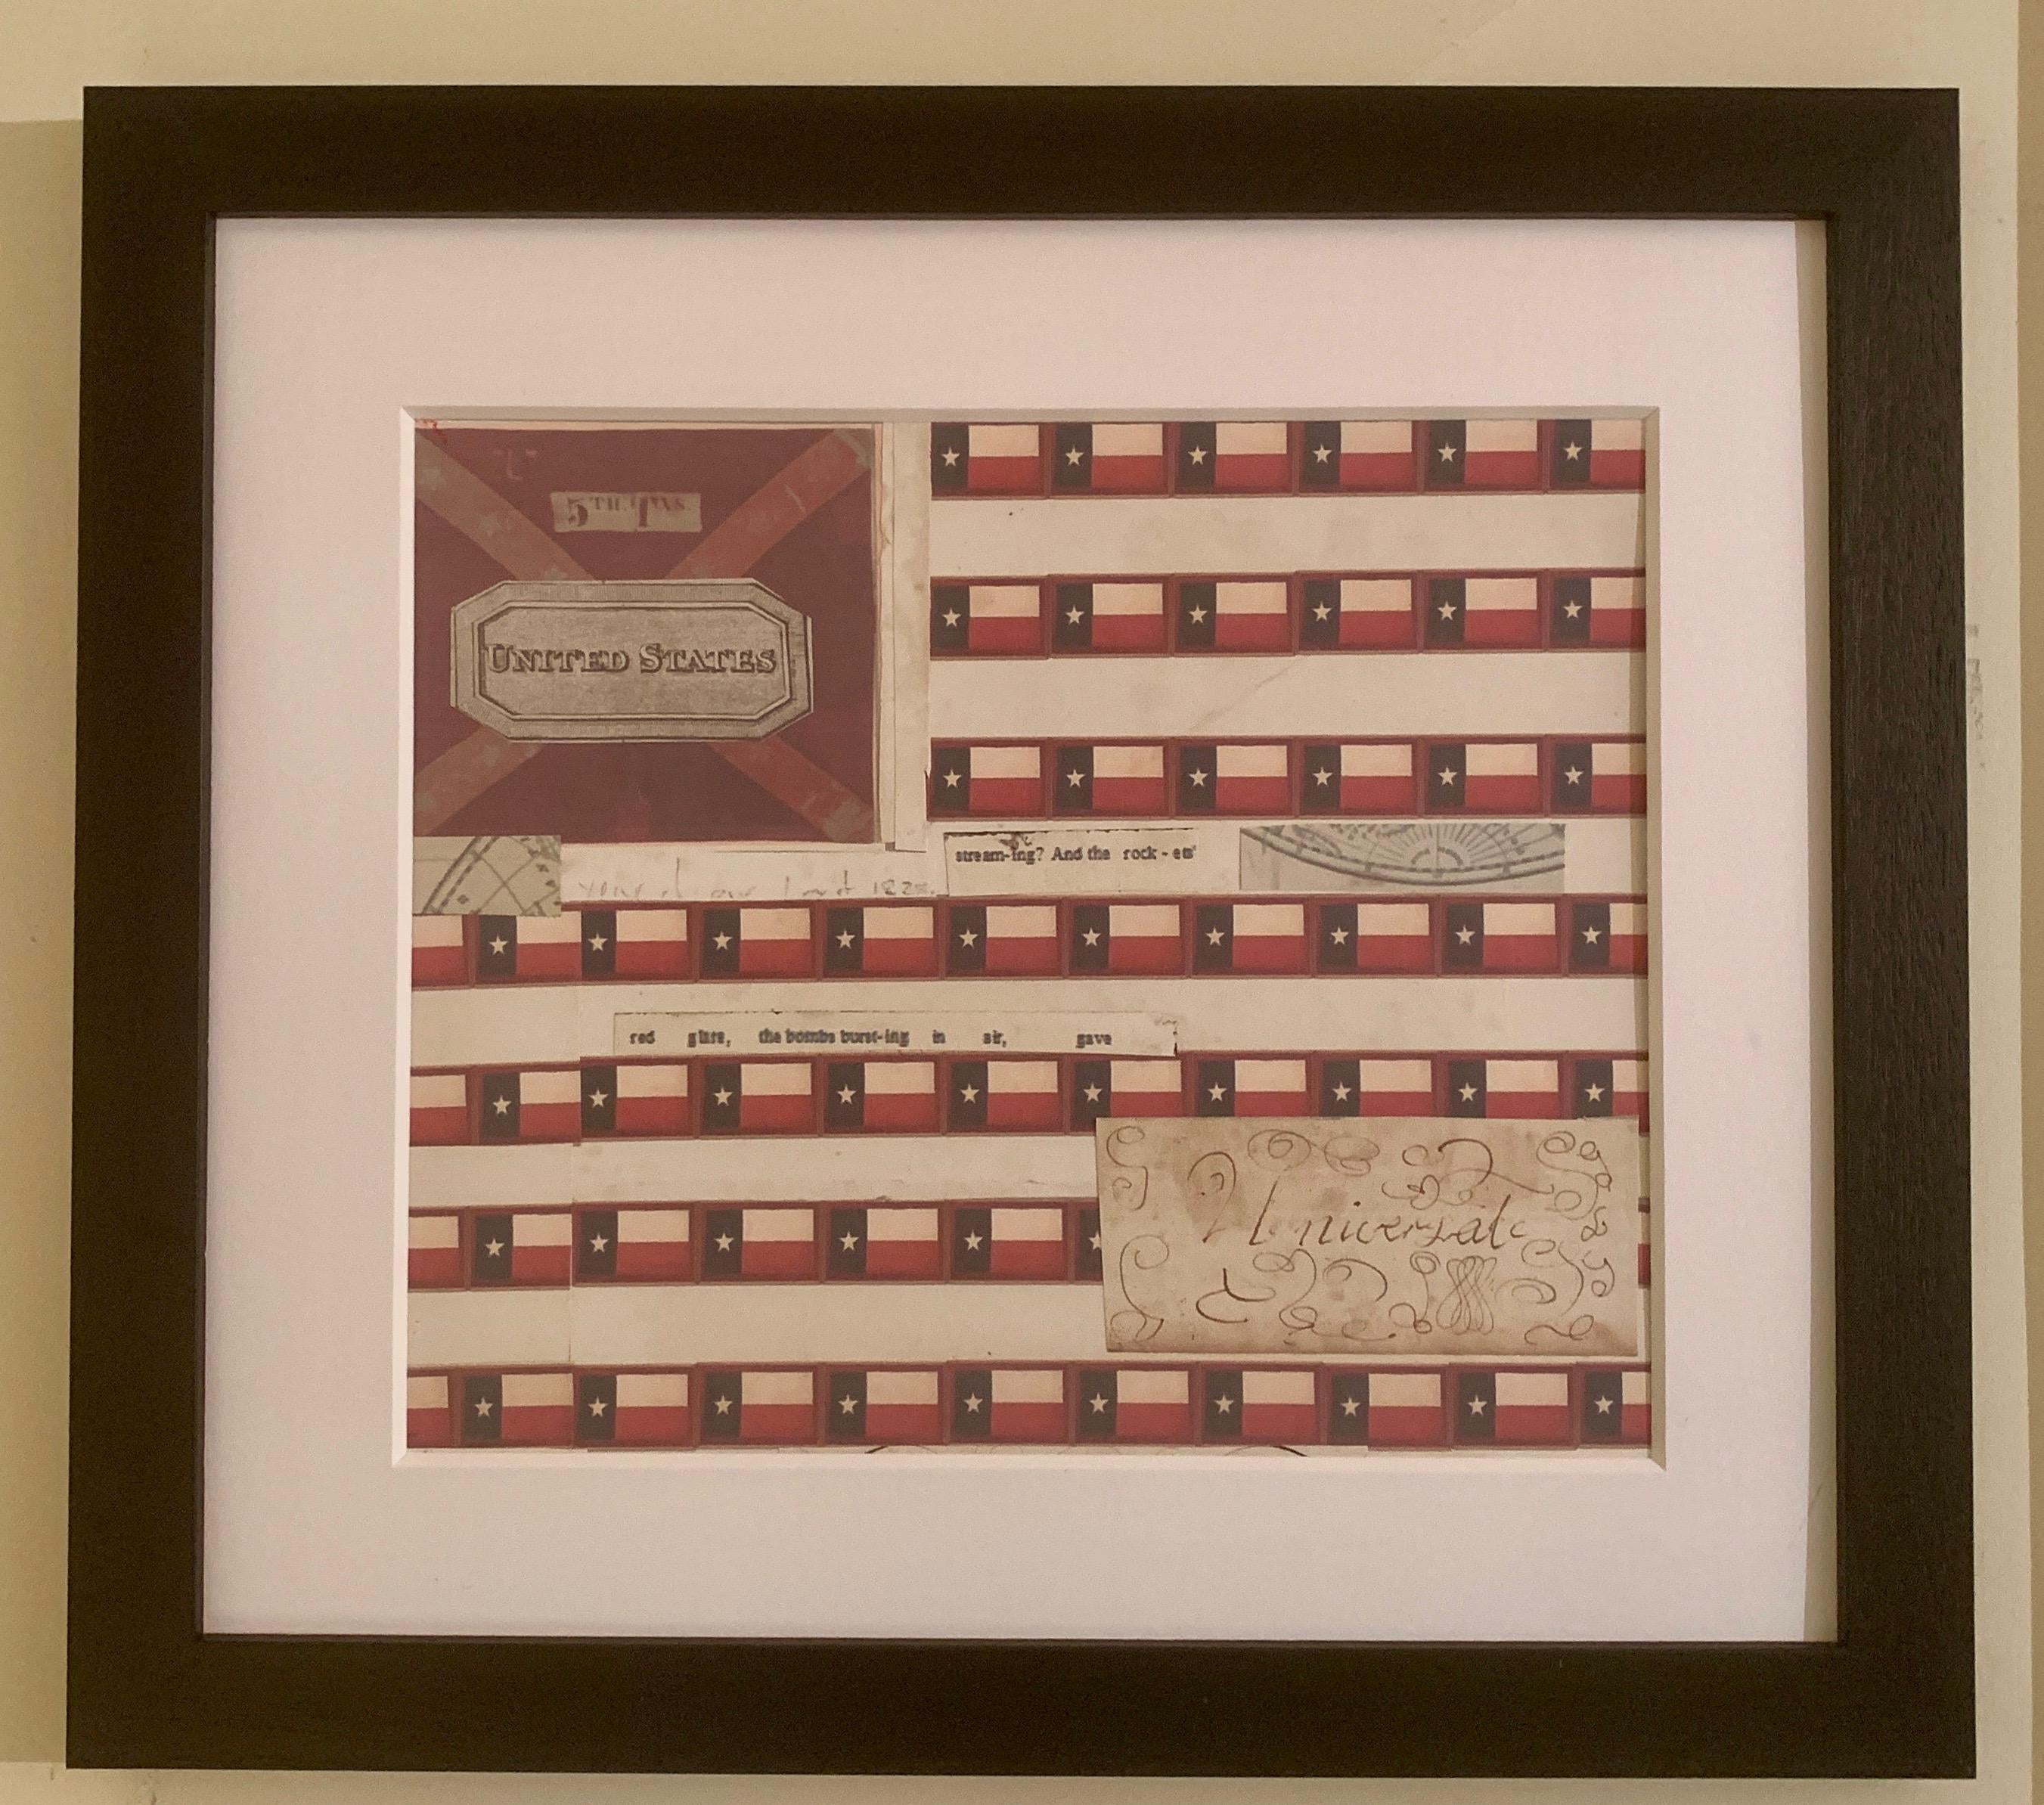 American flag collage with colored prints of the Texas flag and original ink - Mixed Media Art by Claude Howard Stuart